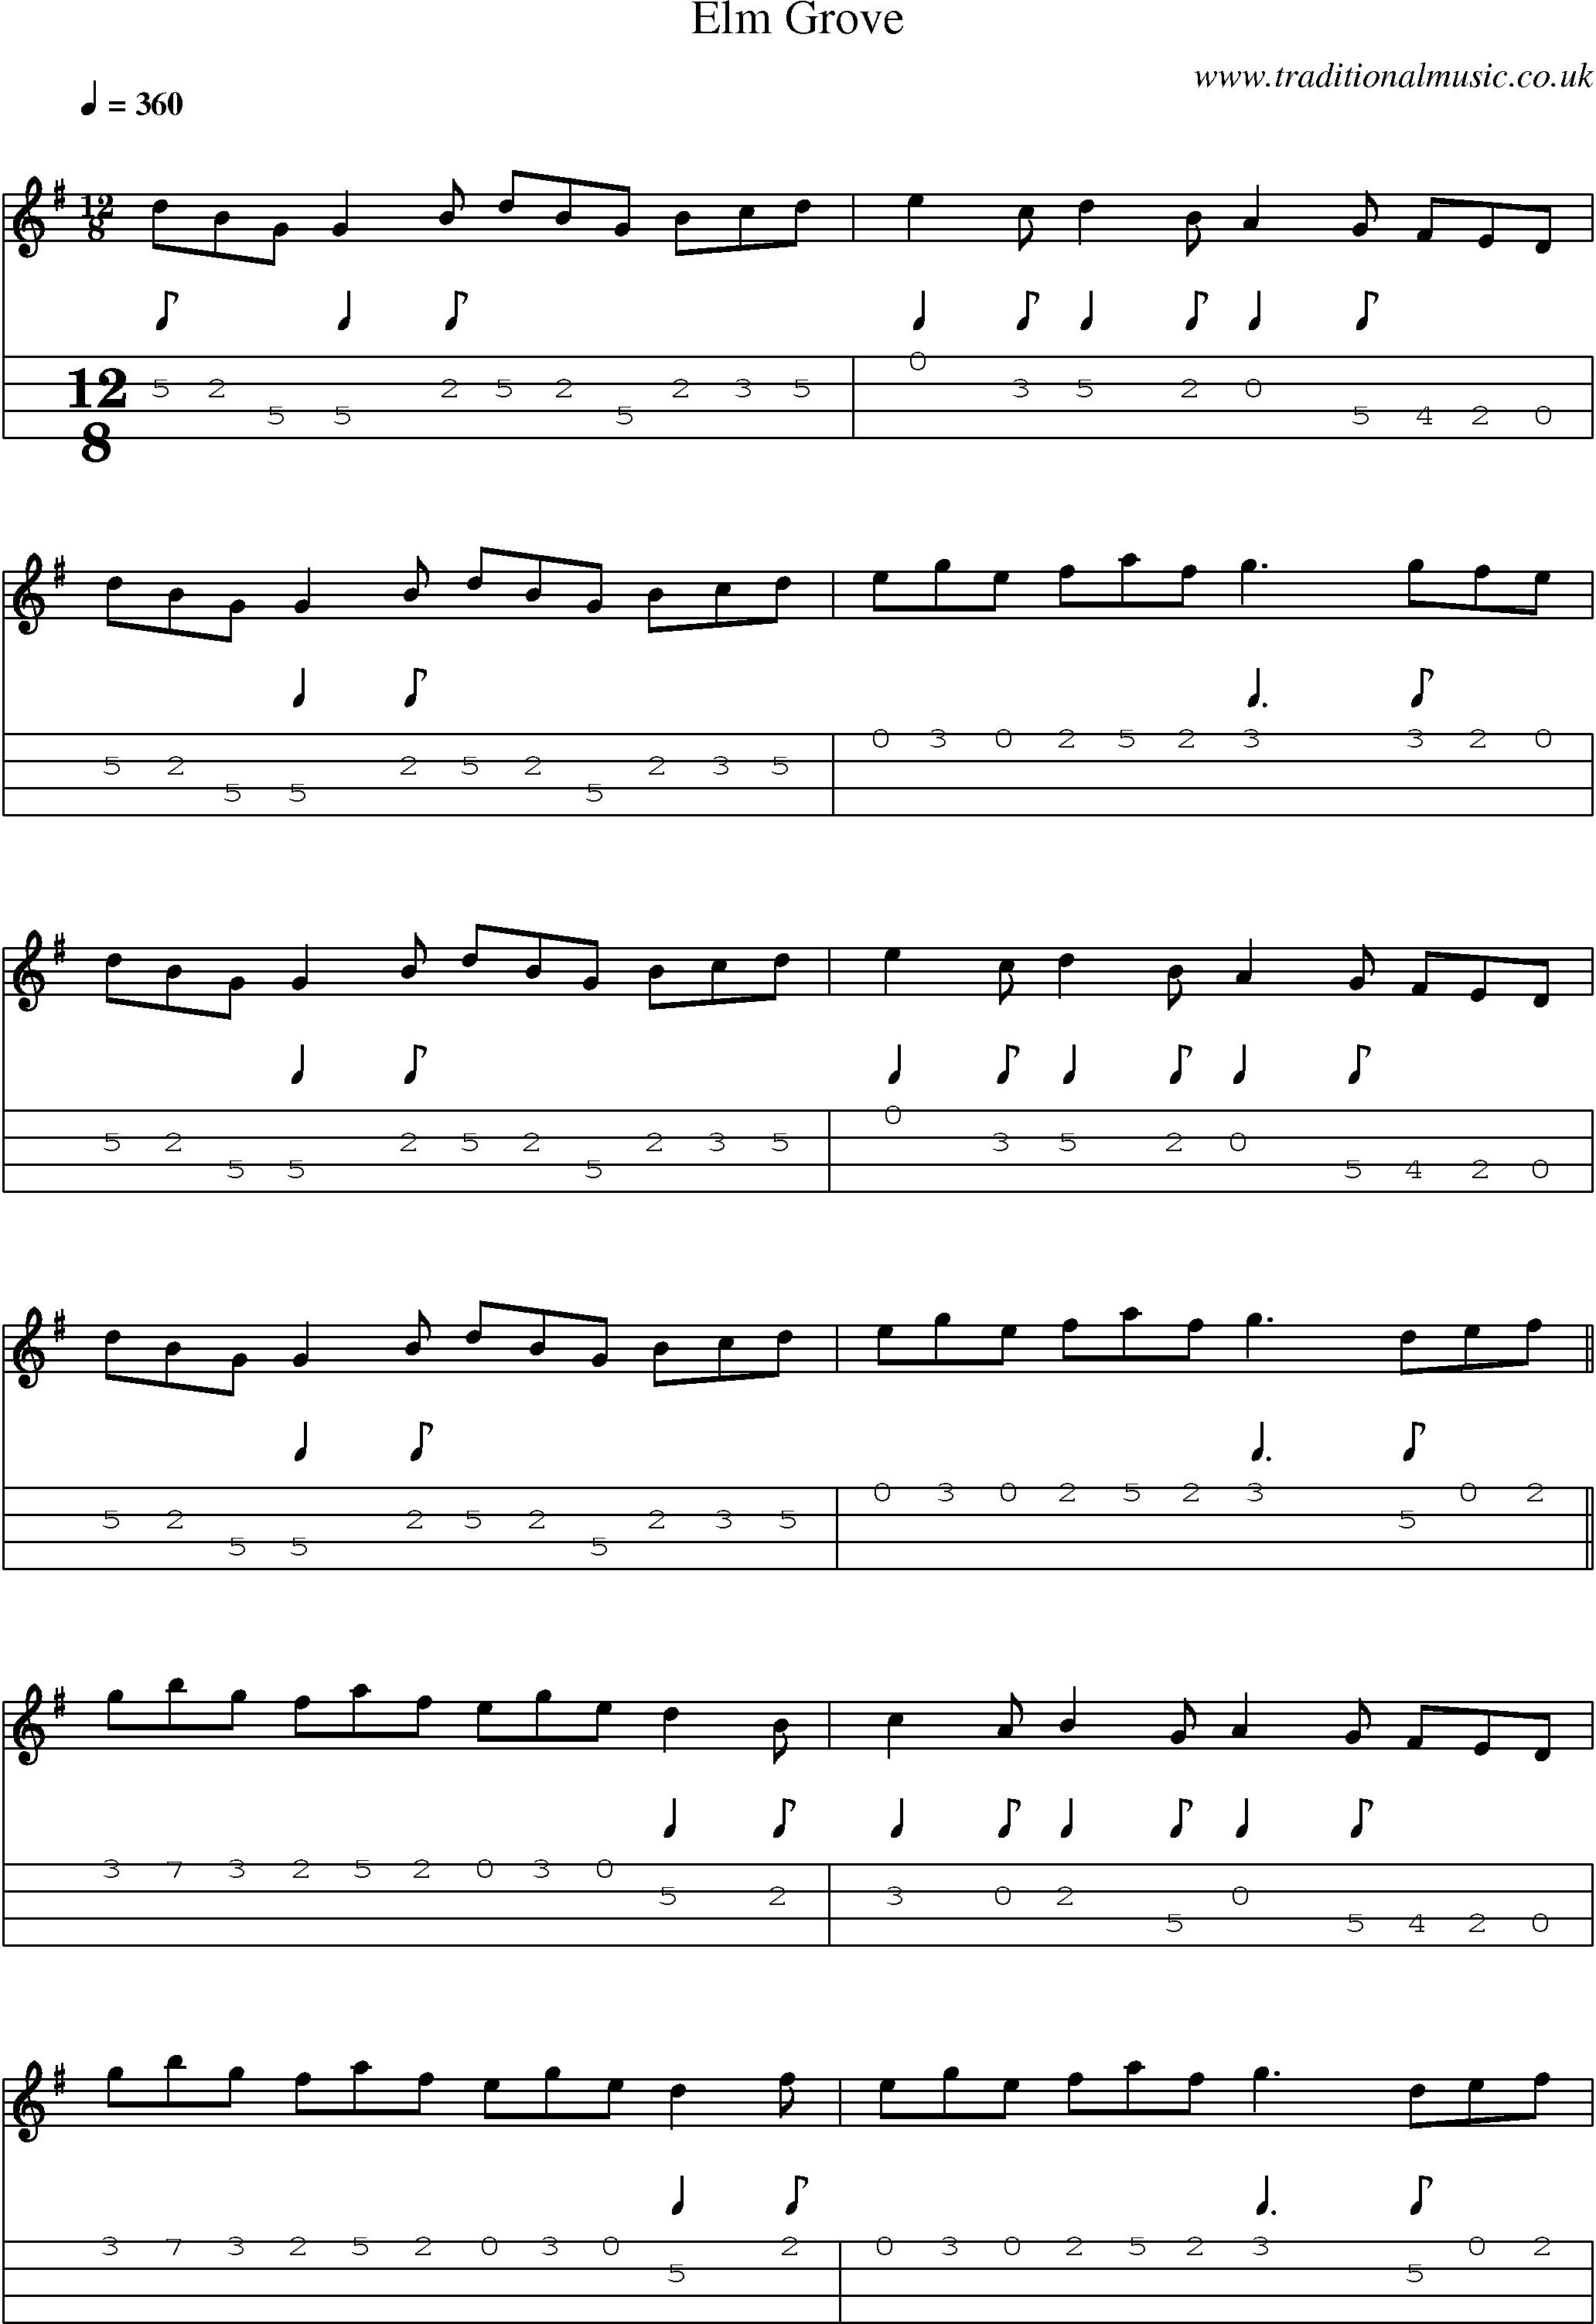 Music Score and Mandolin Tabs for Elm Grove